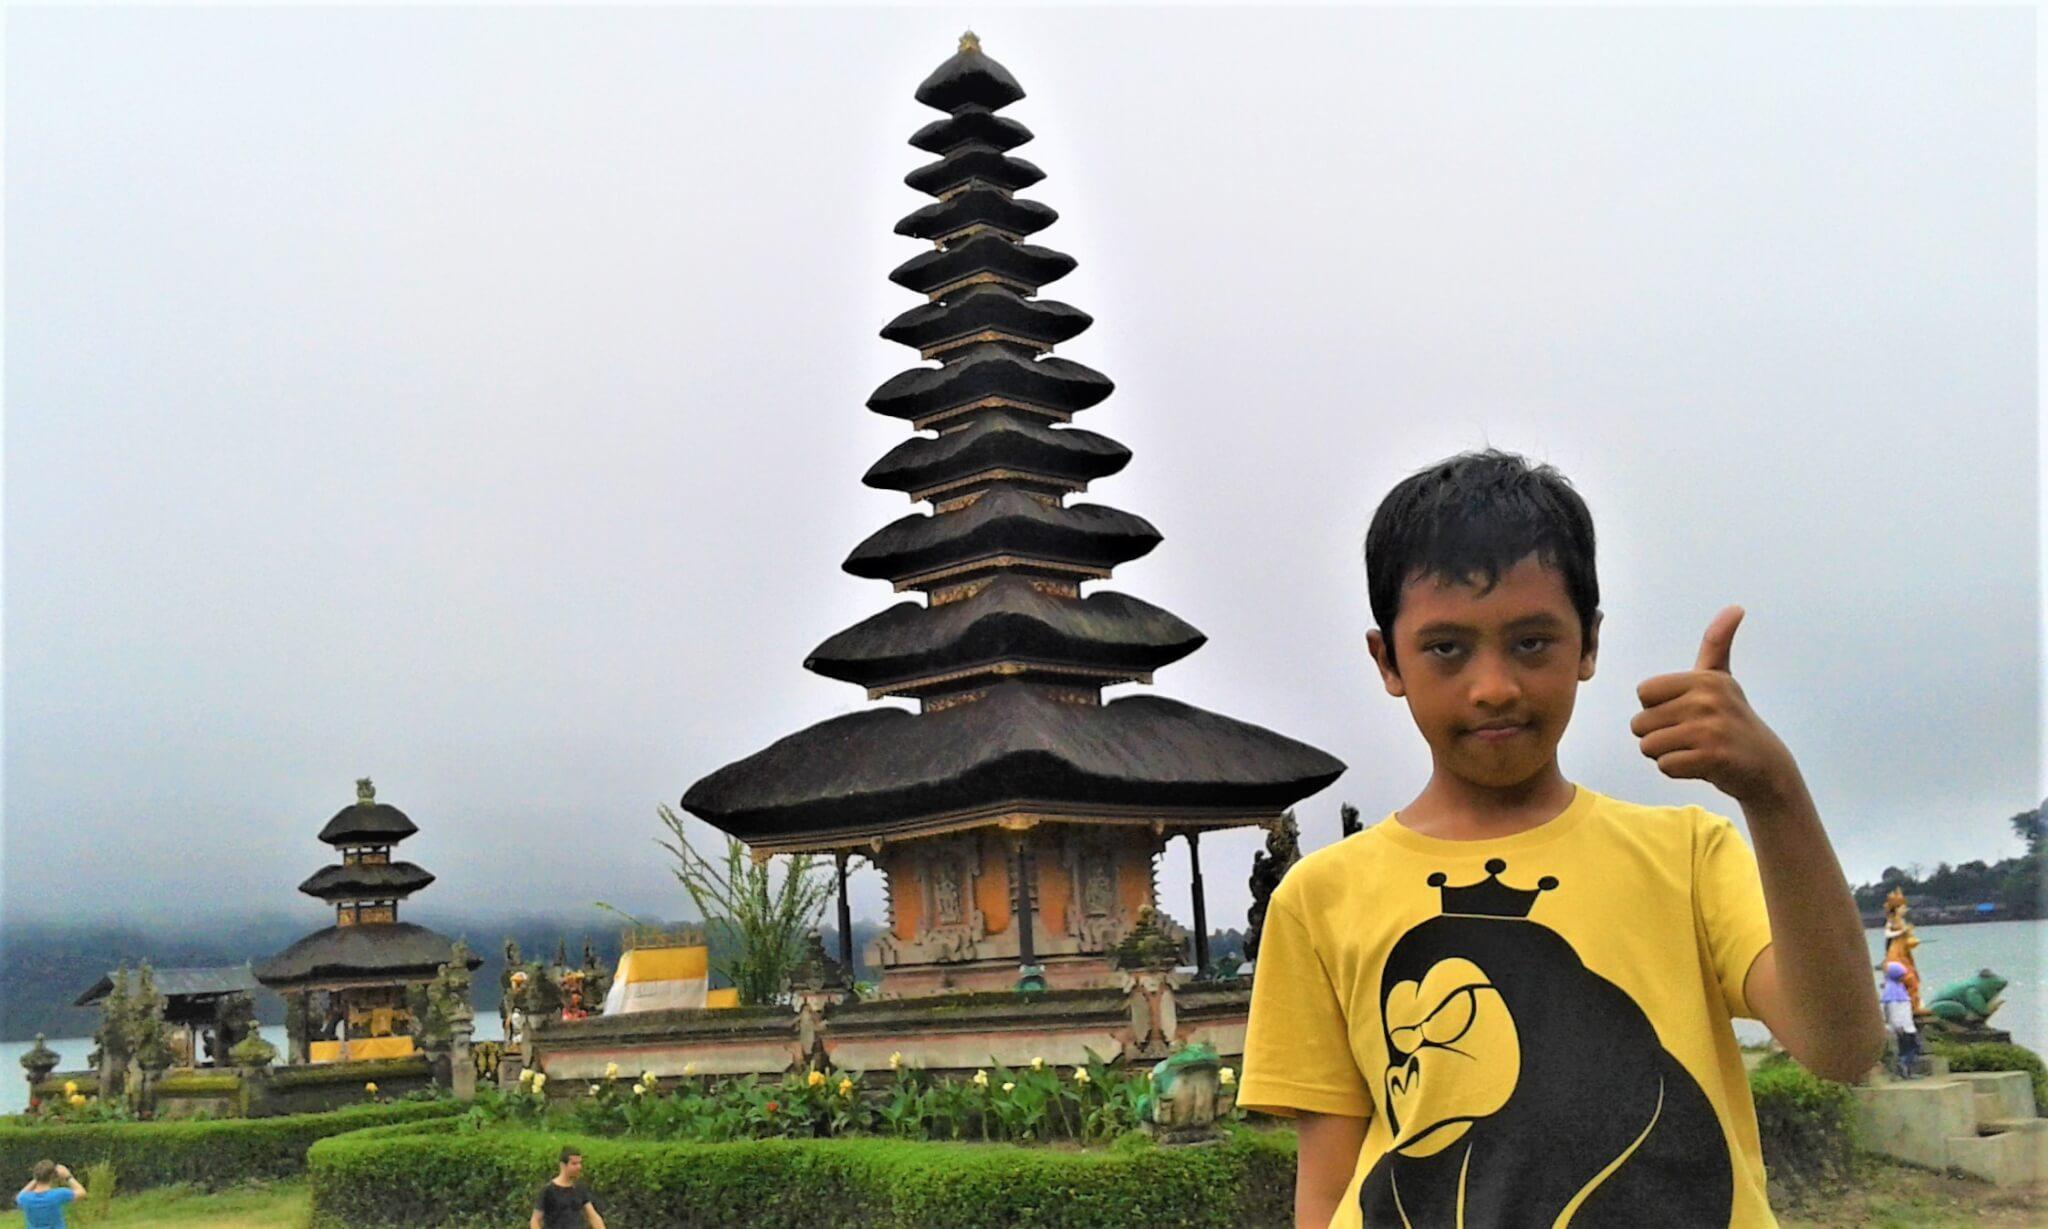 discover Bali Island to enjoy the beautiful scenic view, visit the temples.